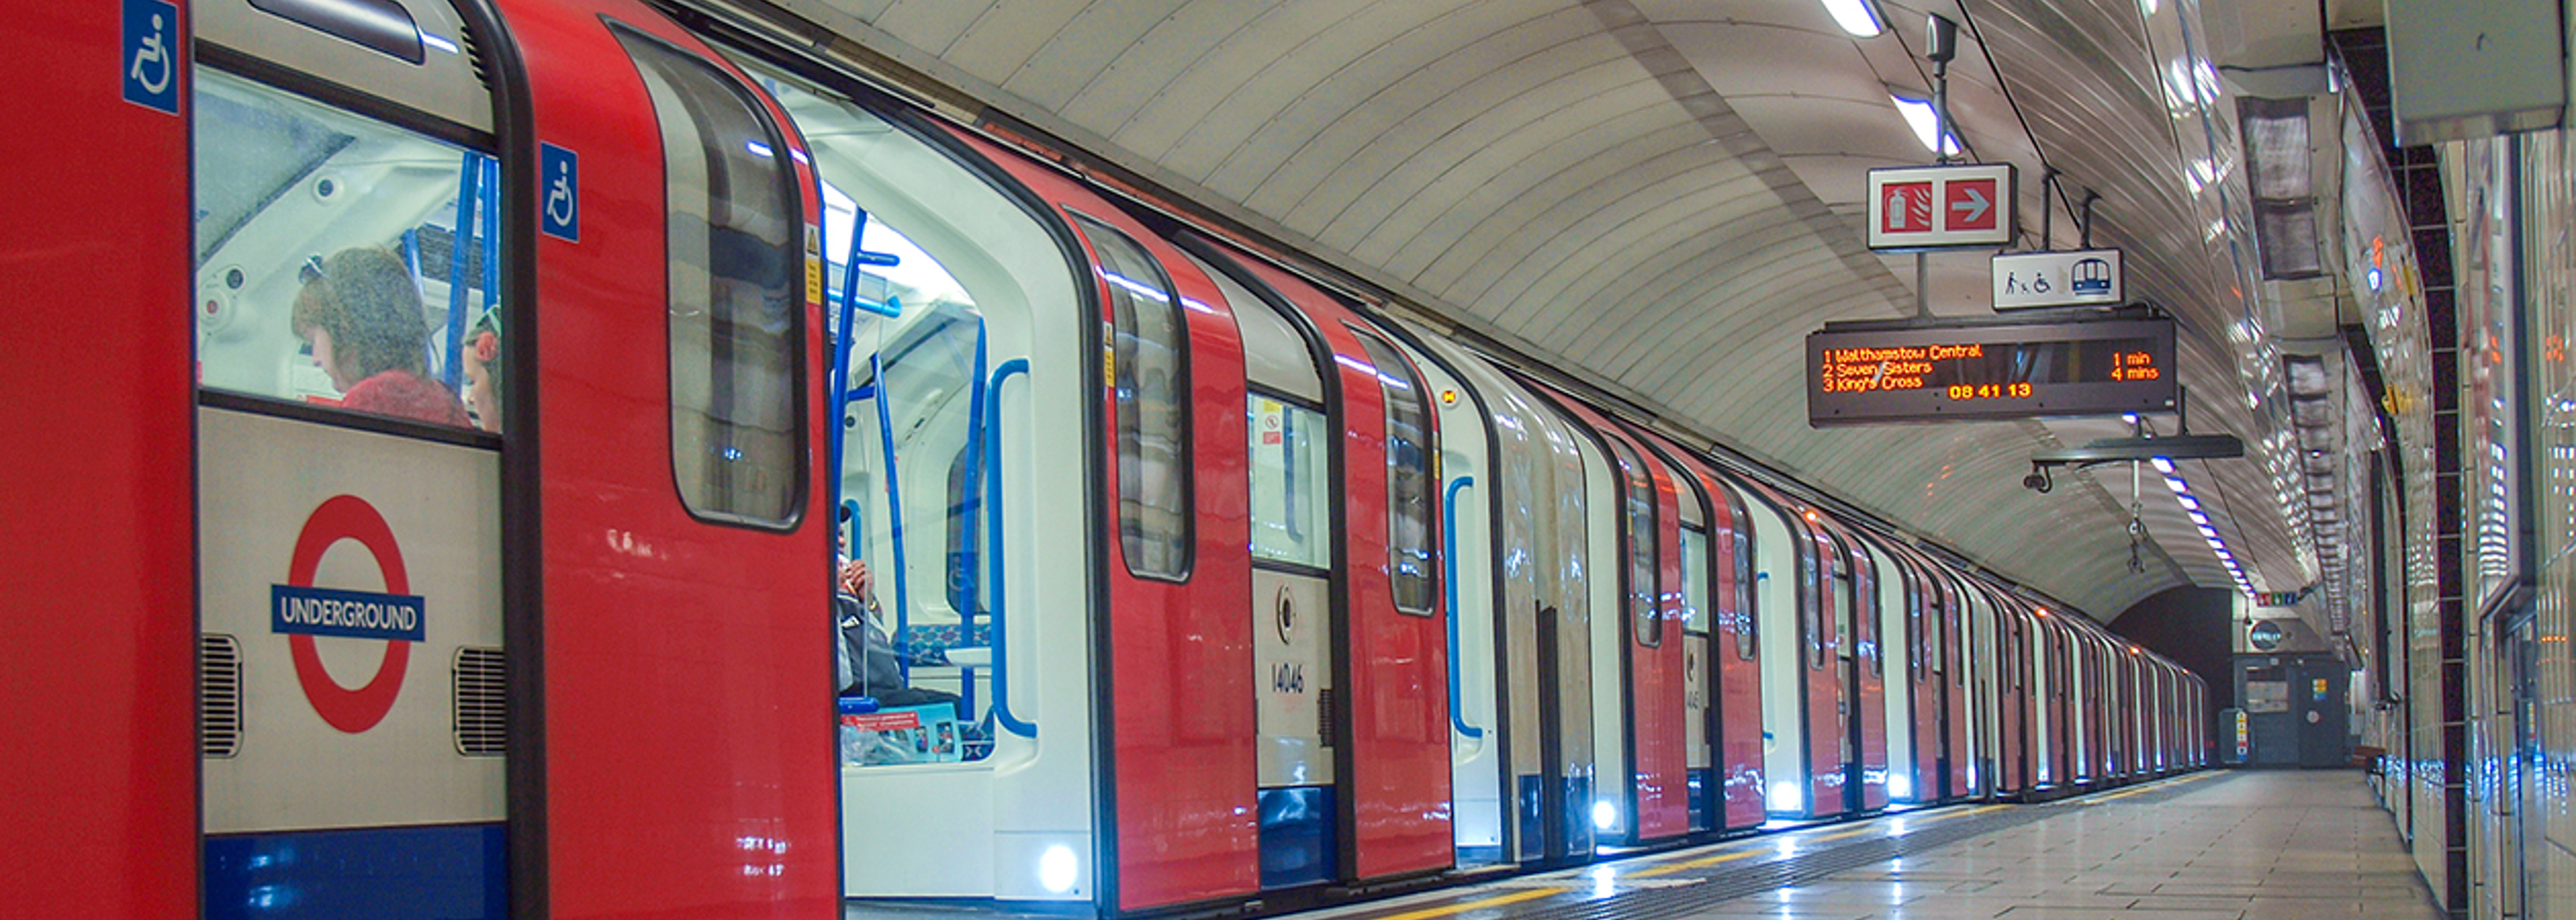 Tube drivers to go slow over noisy track